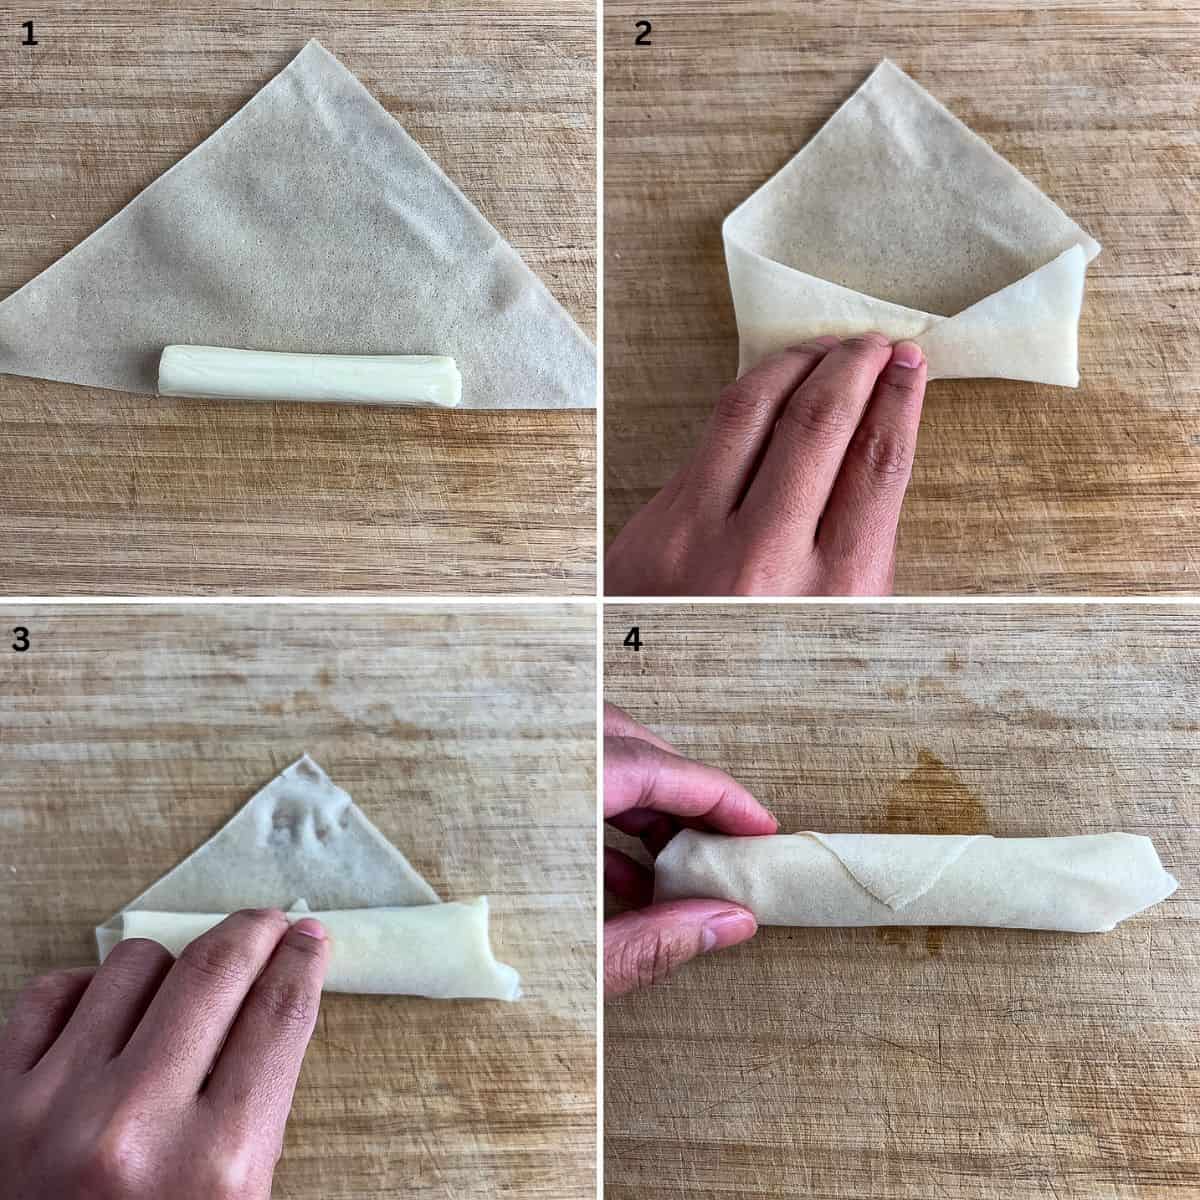 Step by step on how to fold lumpia.